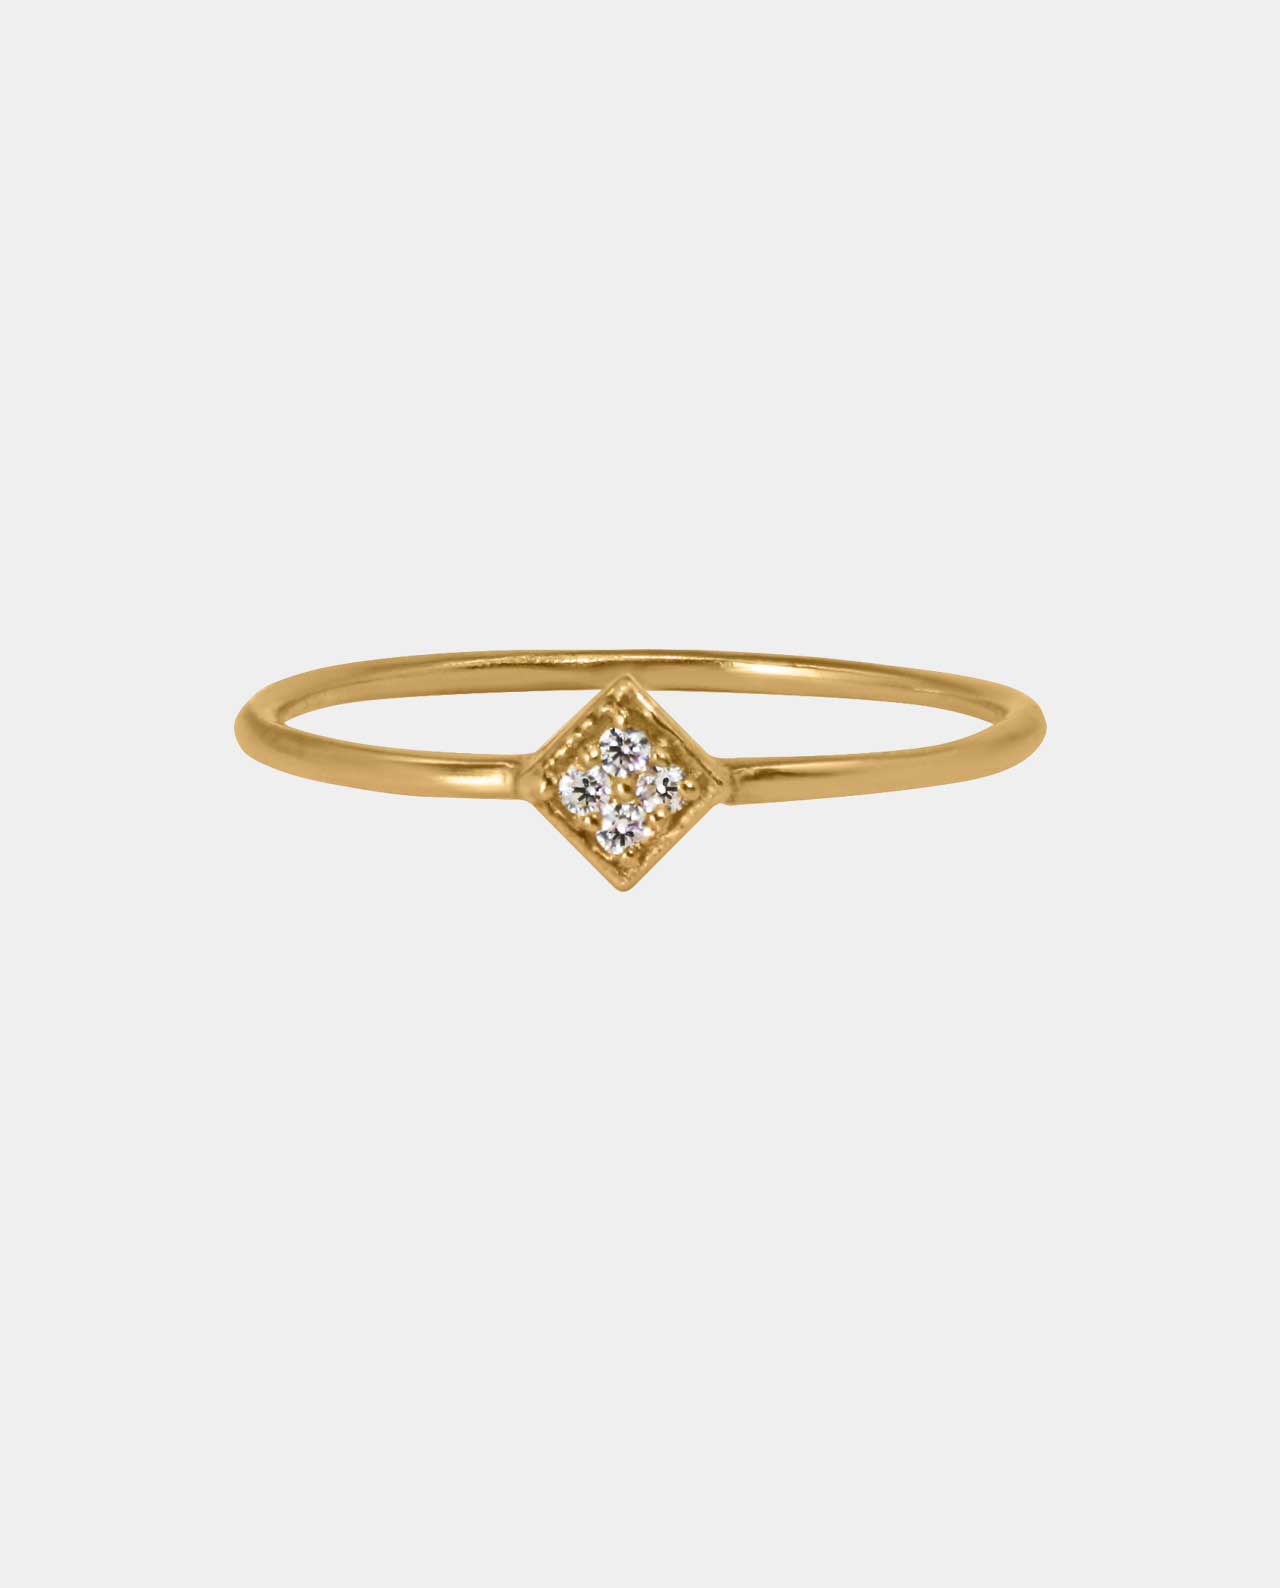 Beautiful ring set with four sparkling zirconias in an original design that radiates a premium piece of jewelry in interplay with the golden colour of gold